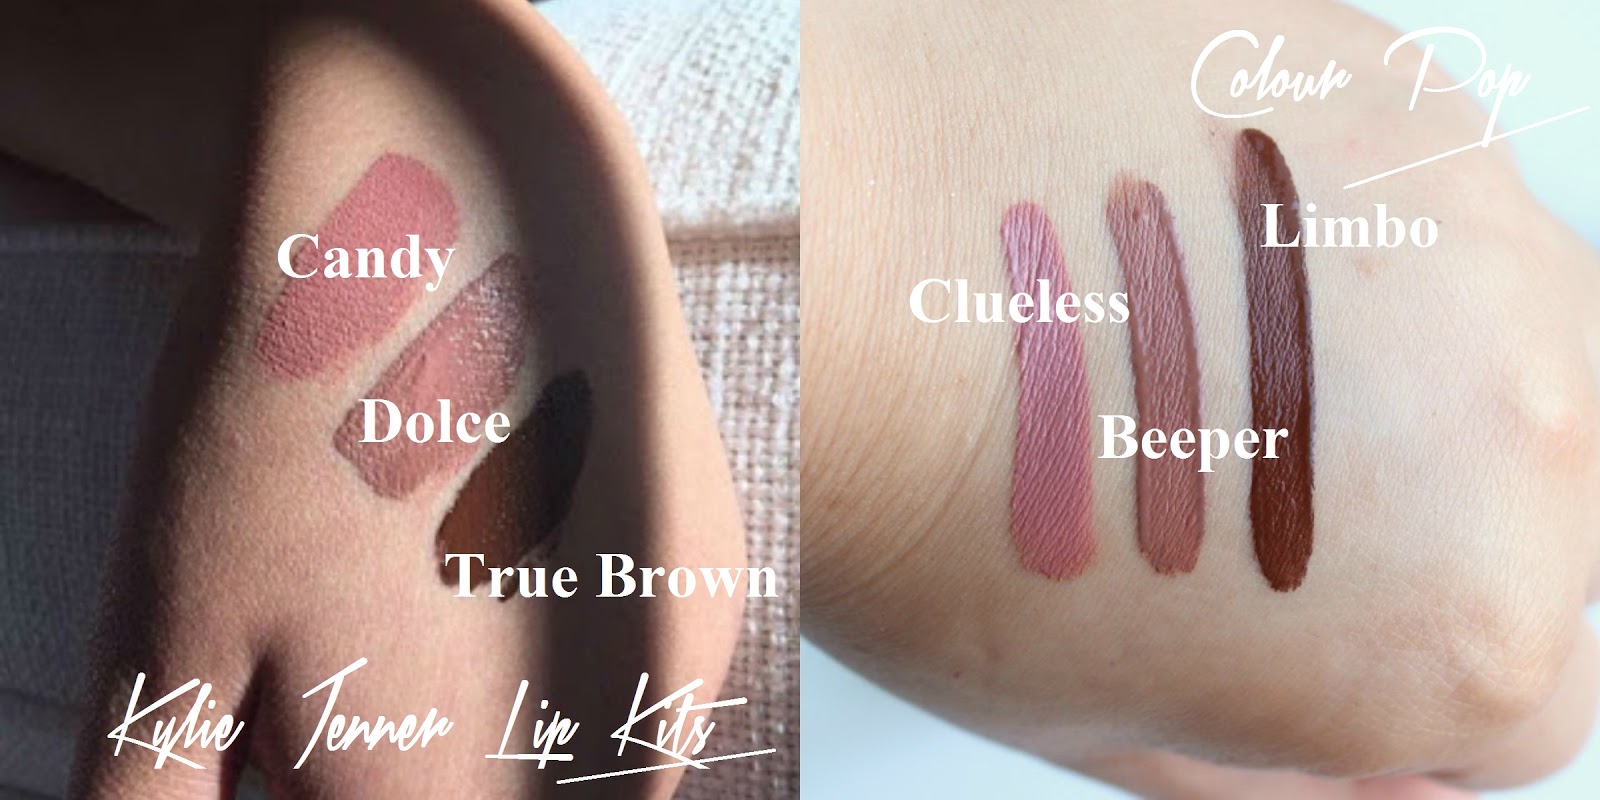 6 Makeup Dupes That Will Save You Tons Of Money On Your